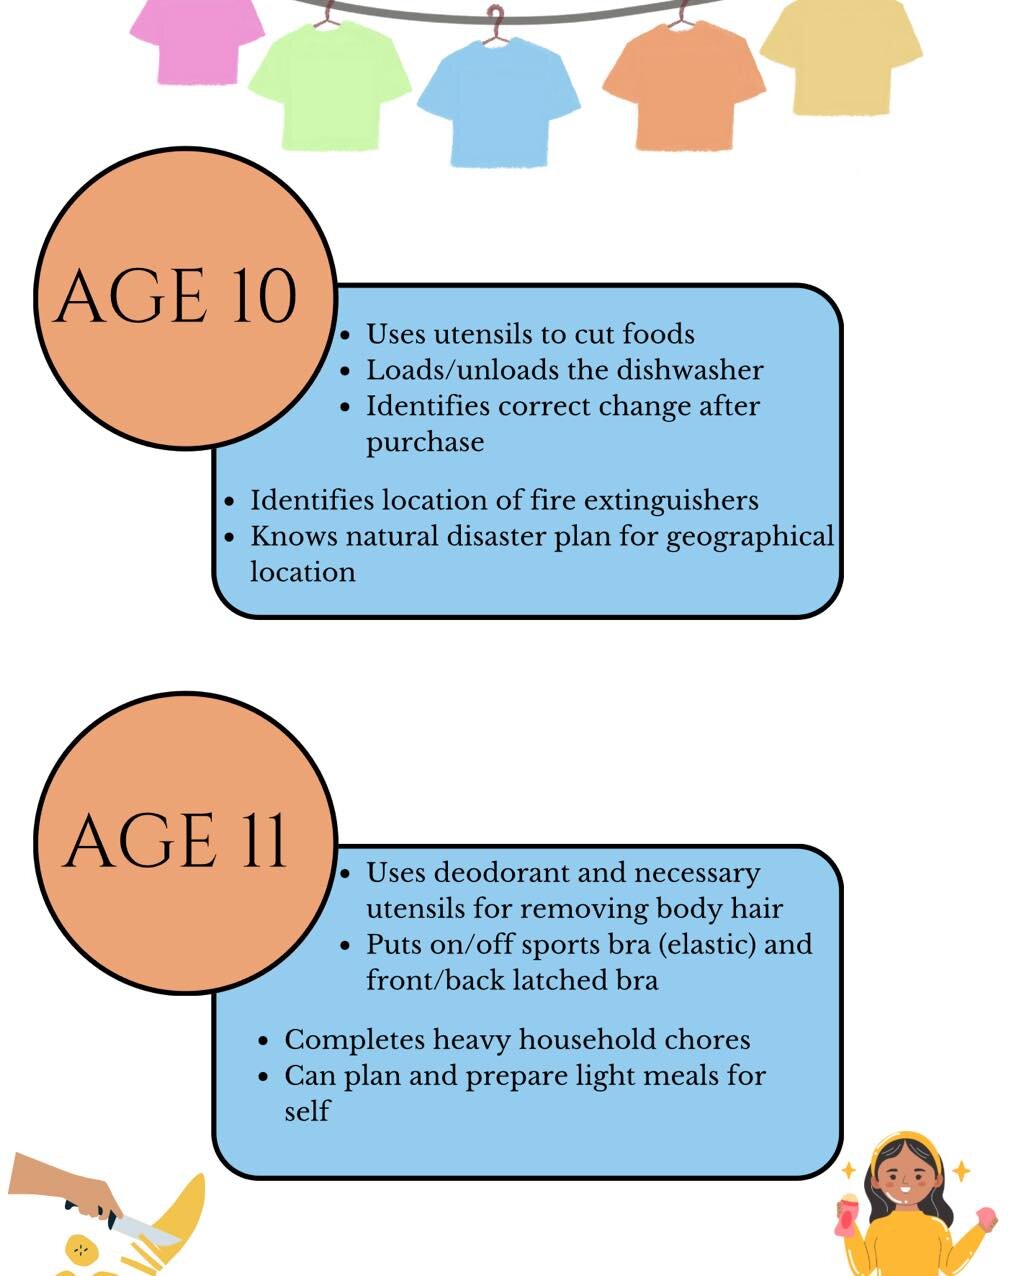 To close out our week of showing you different ADL tasks of kids, check out these activities for kids ages 10-13! Feel free to reach out with any questions :)